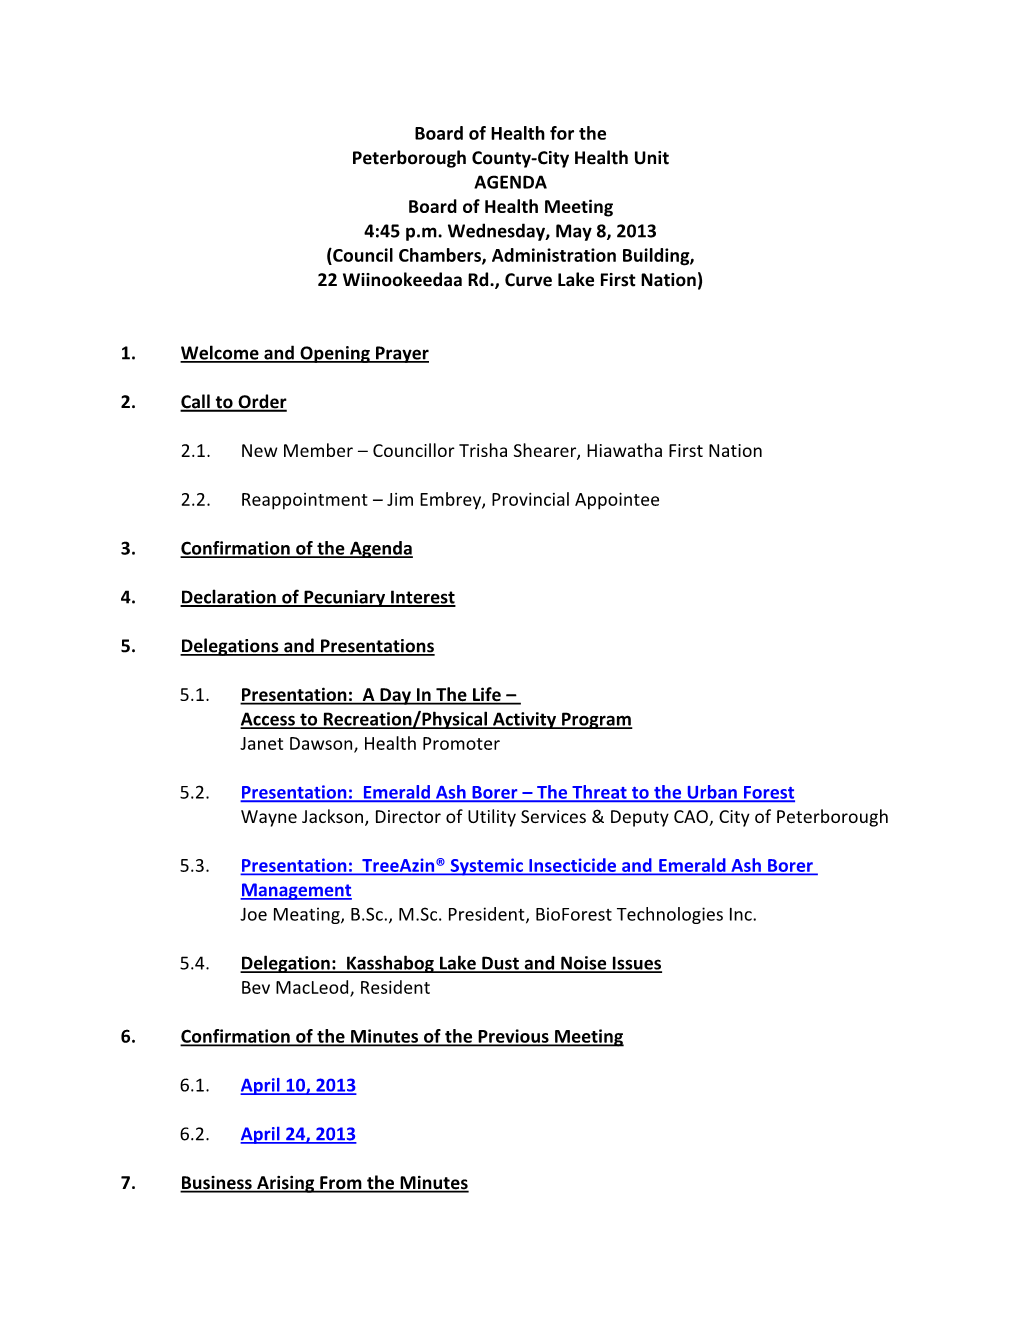 Board of Health for the Peterborough County-City Health Unit AGENDA Board of Health Meeting 4:45 P.M. Wednesday, May 8, 2013 (C